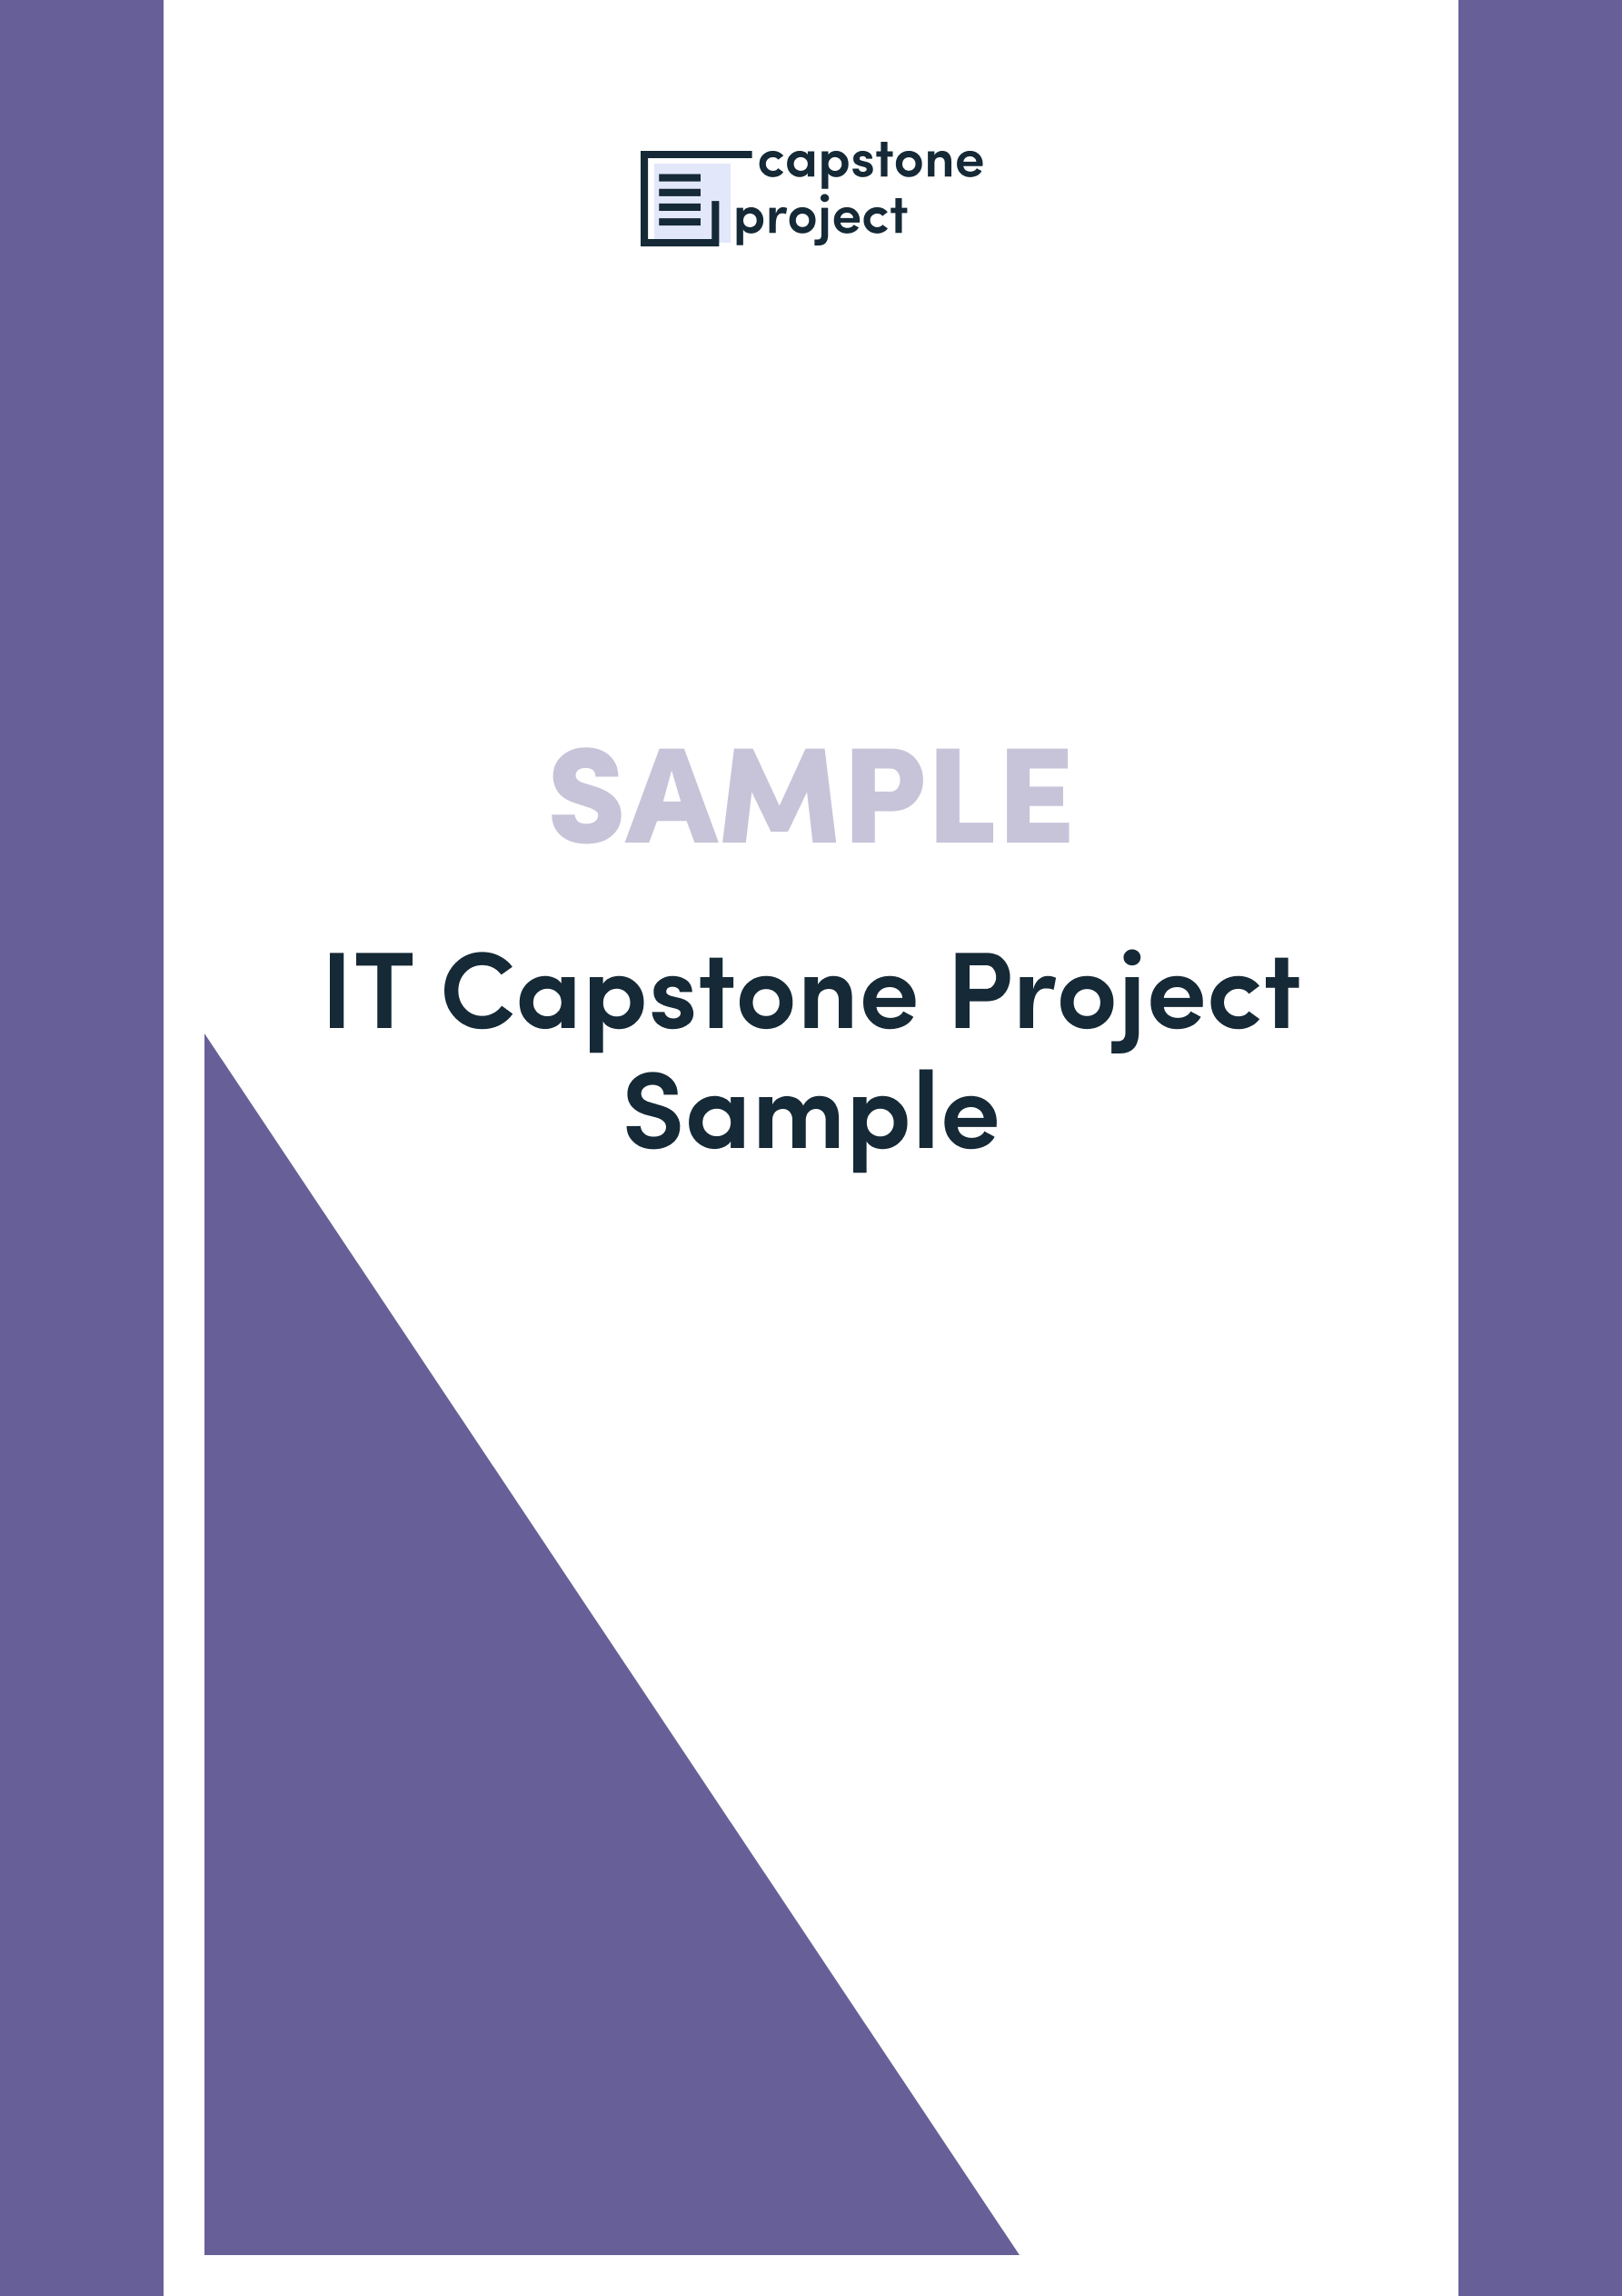 capstone project for data science